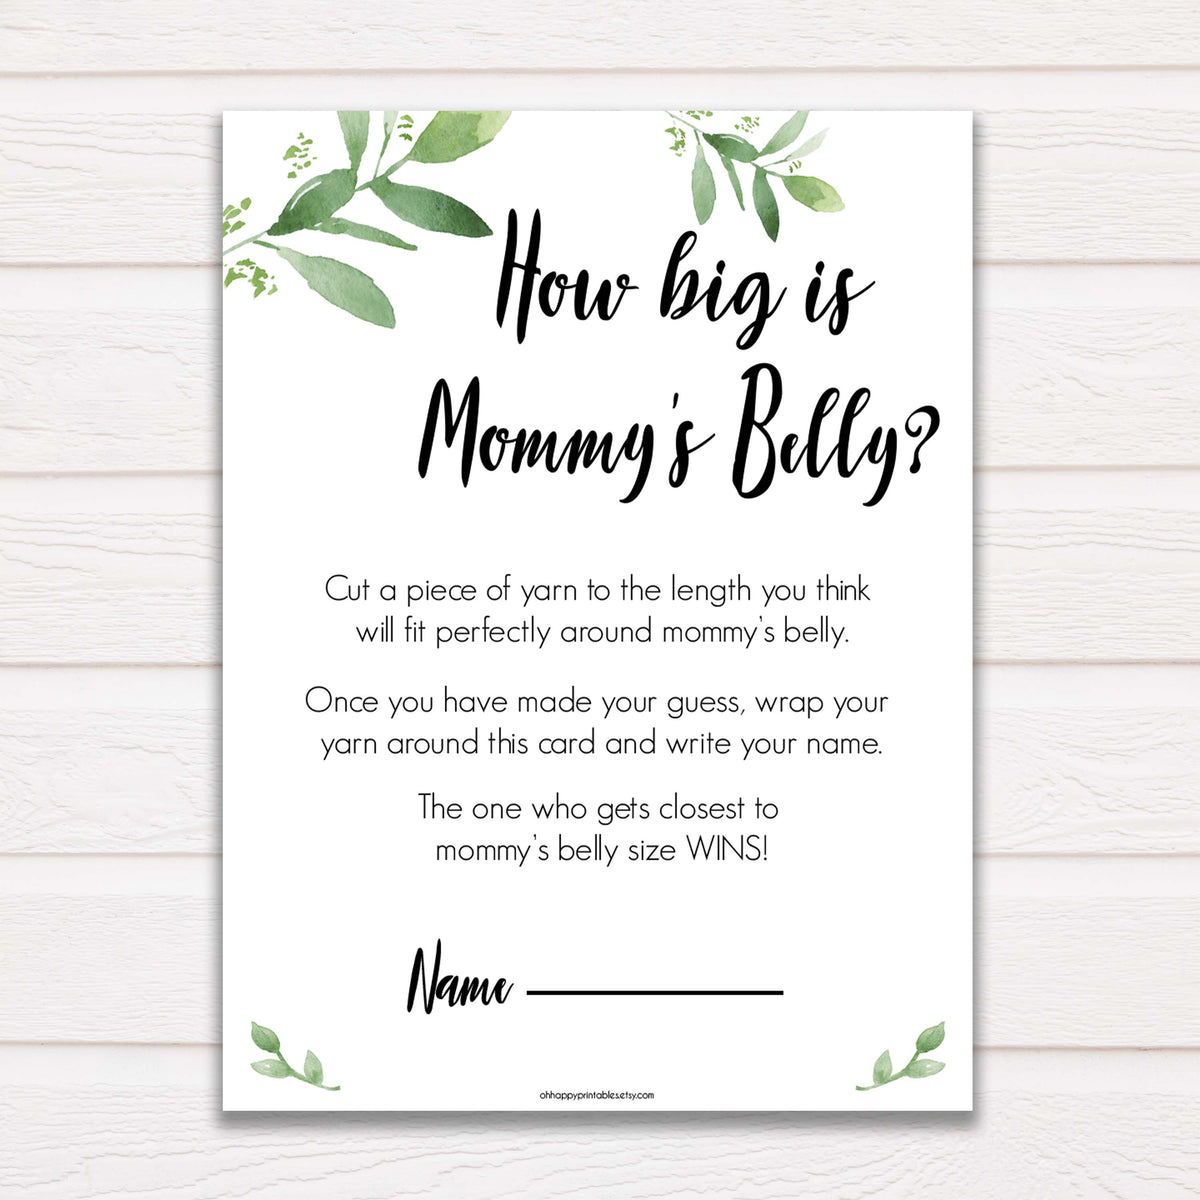 how-big-is-mommys-belly-botanical-baby-shower-games-ohhappyprintables